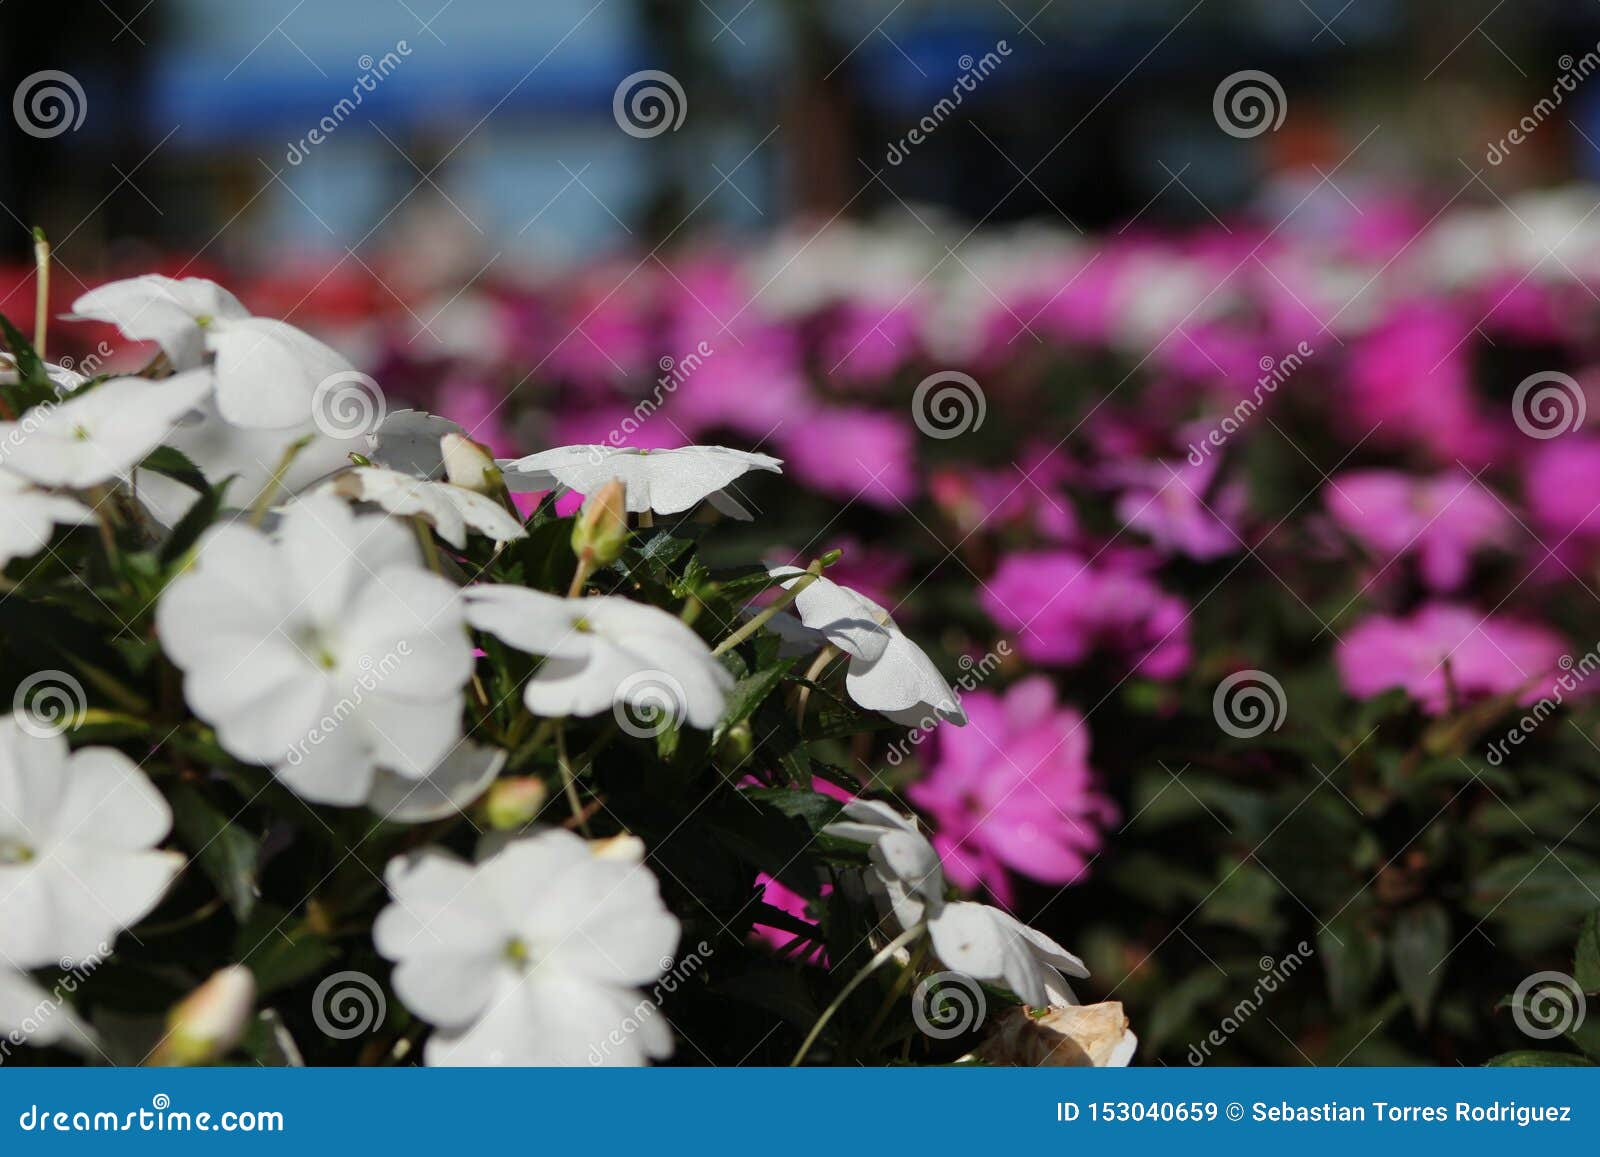 white flowers with purple flowers